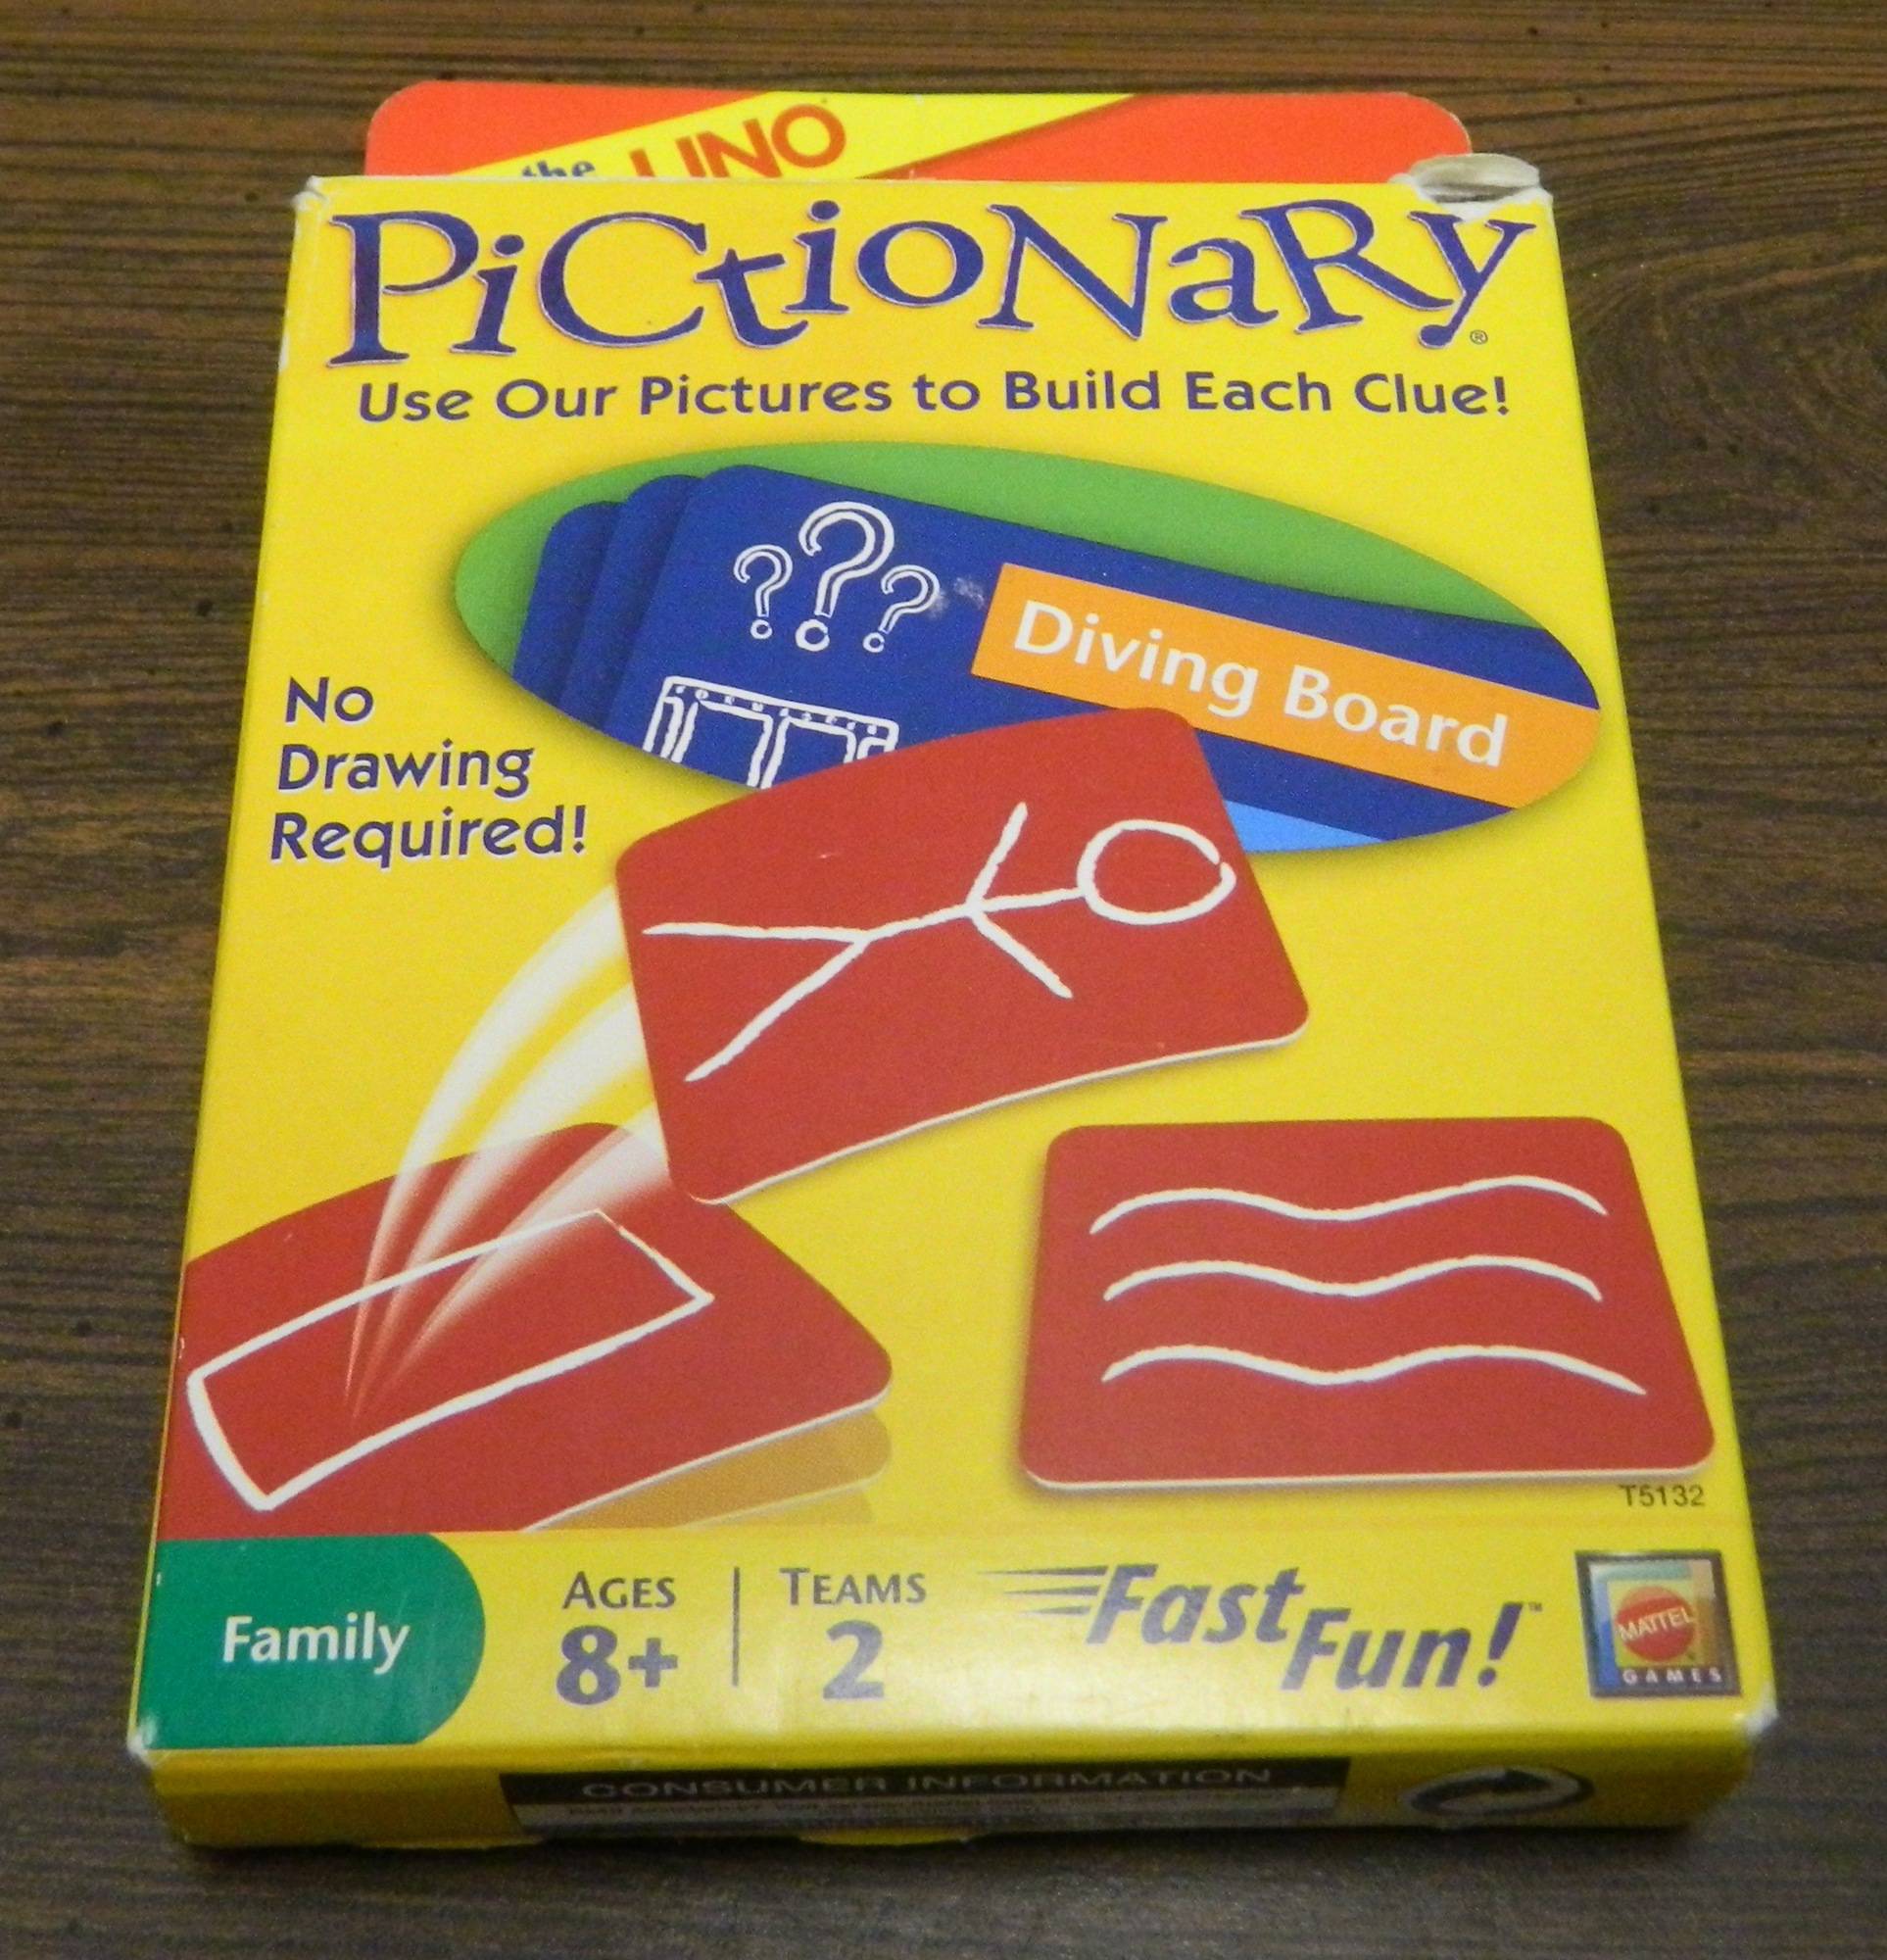 Box for Pictionary Card Game